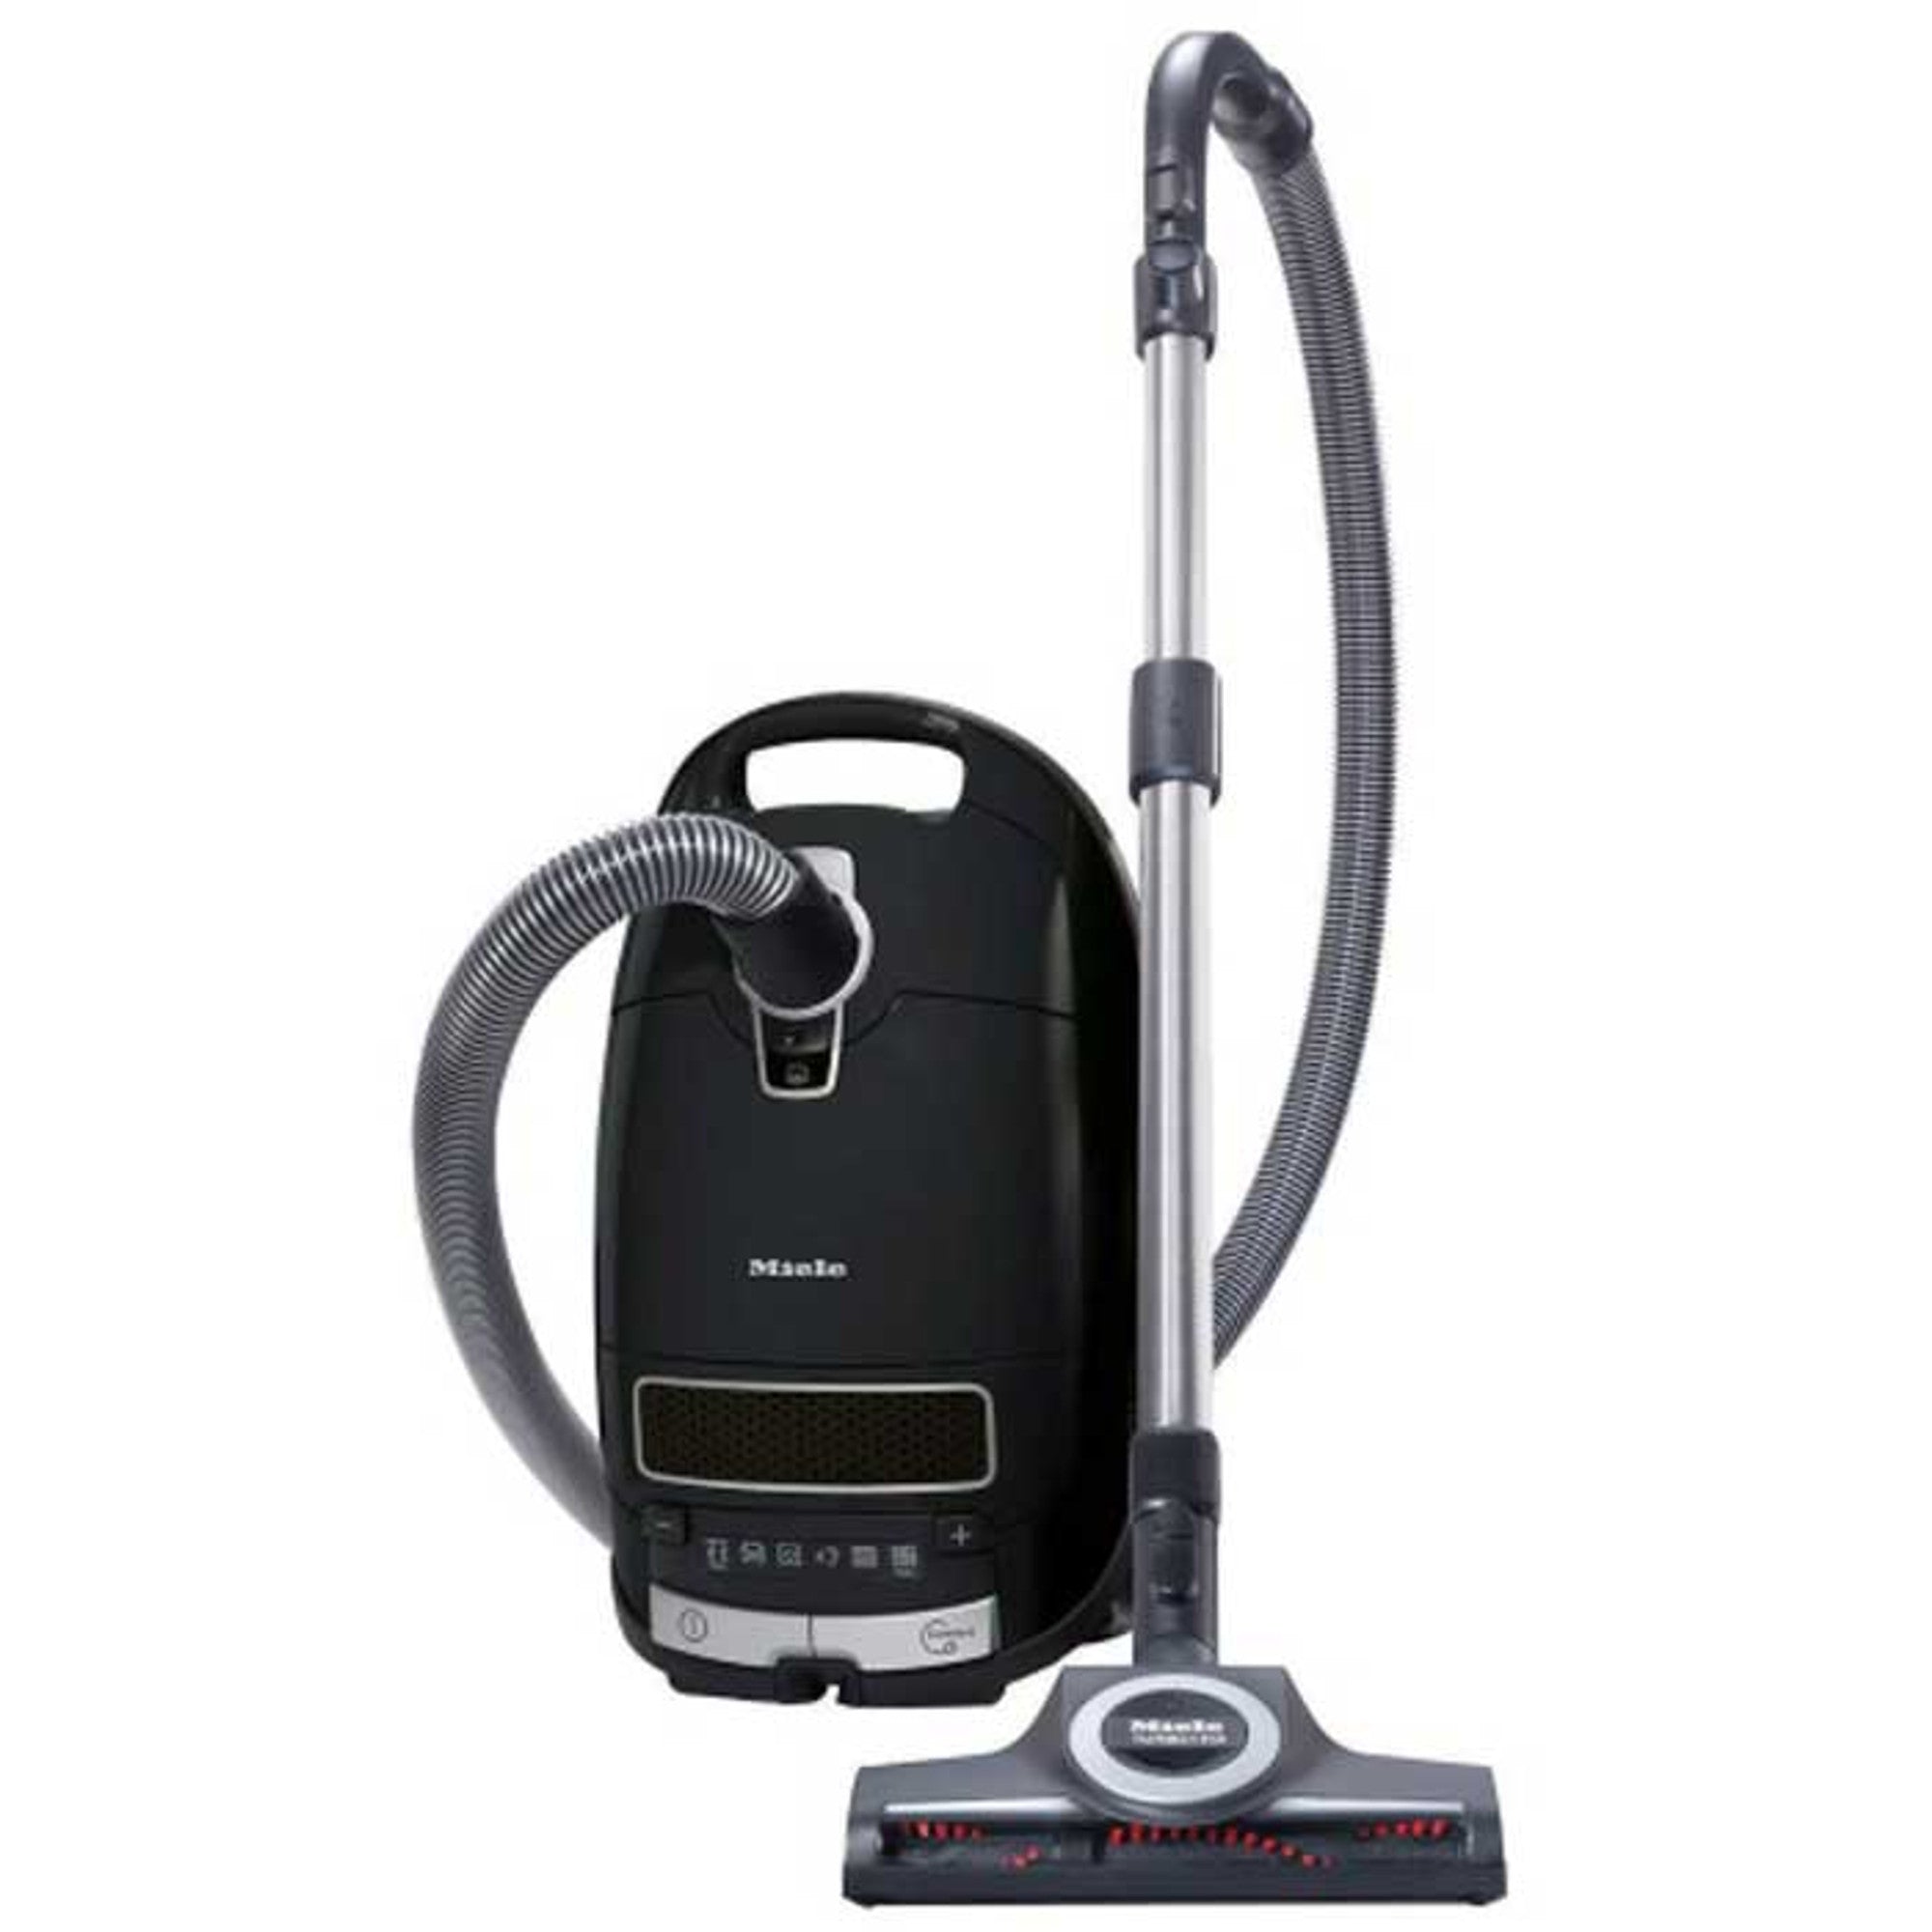 Miele C3 Carpet and Pet Canister vacuum